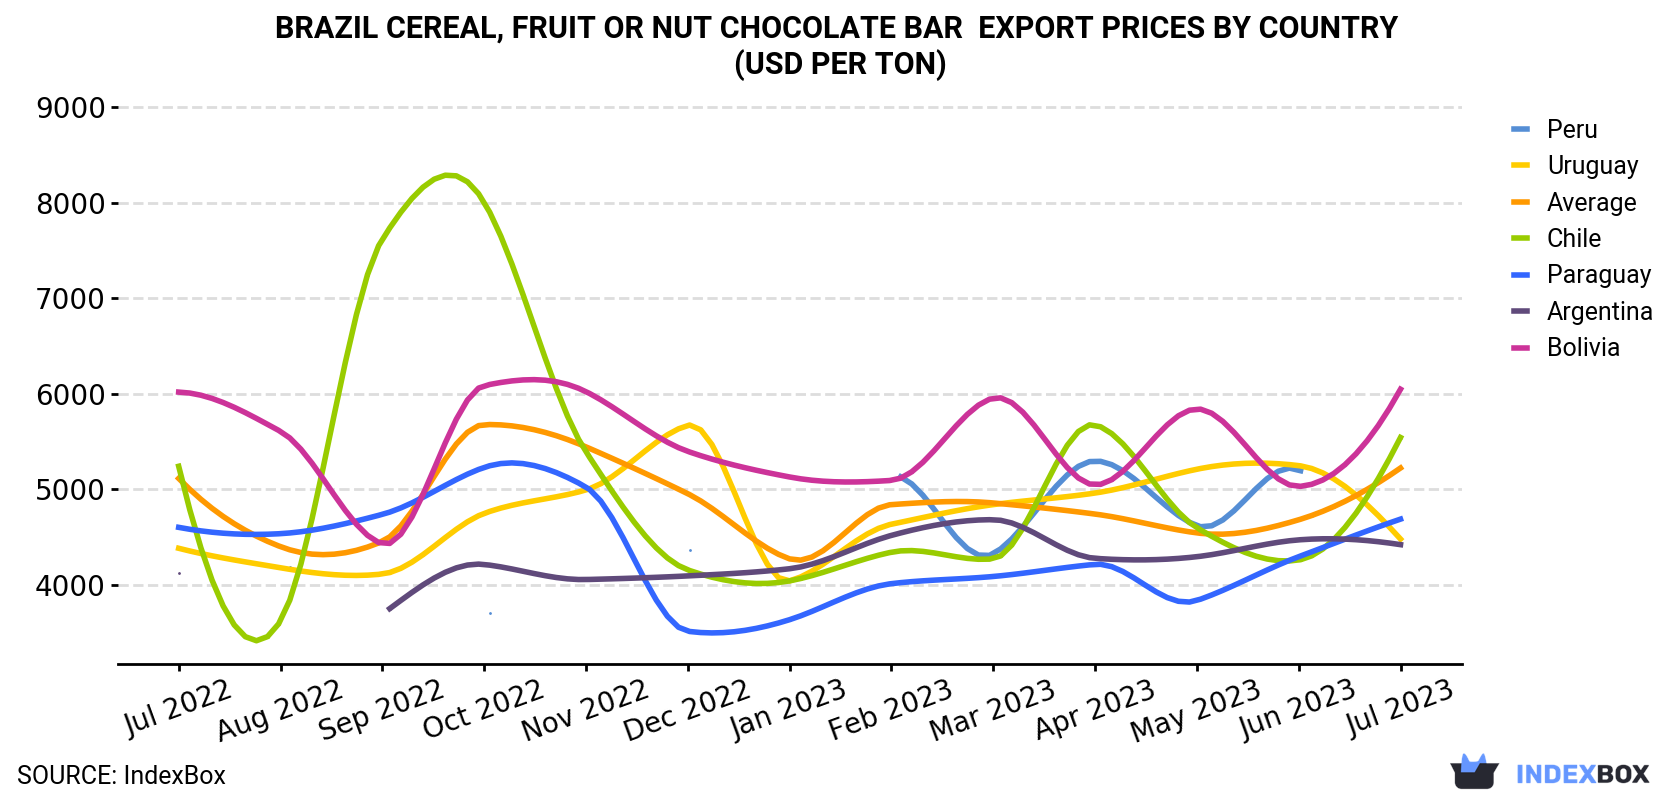 Brazil Cereal, Fruit or Nut Chocolate Bar Export Prices By Country (USD Per Ton)